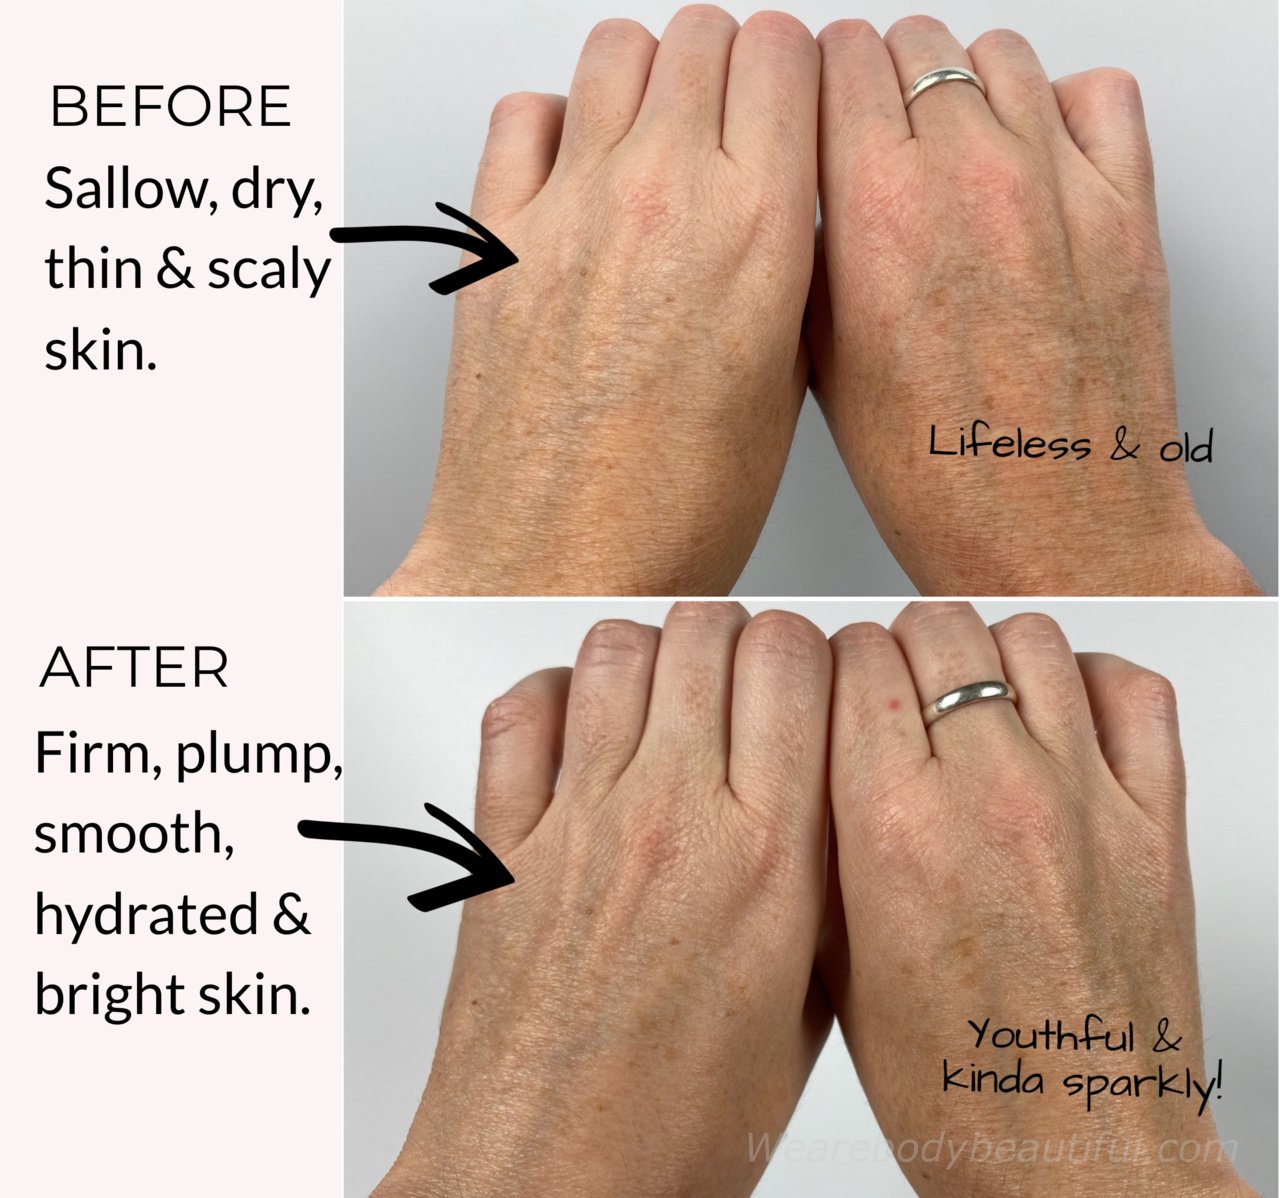 Both hands comparison before and after using the LYMA laser for 4 months. BEFORE: dry, sallow, thin and scaly skin. AFTER: Firm, plump, smooth, hydrated & bright skin. Yay!